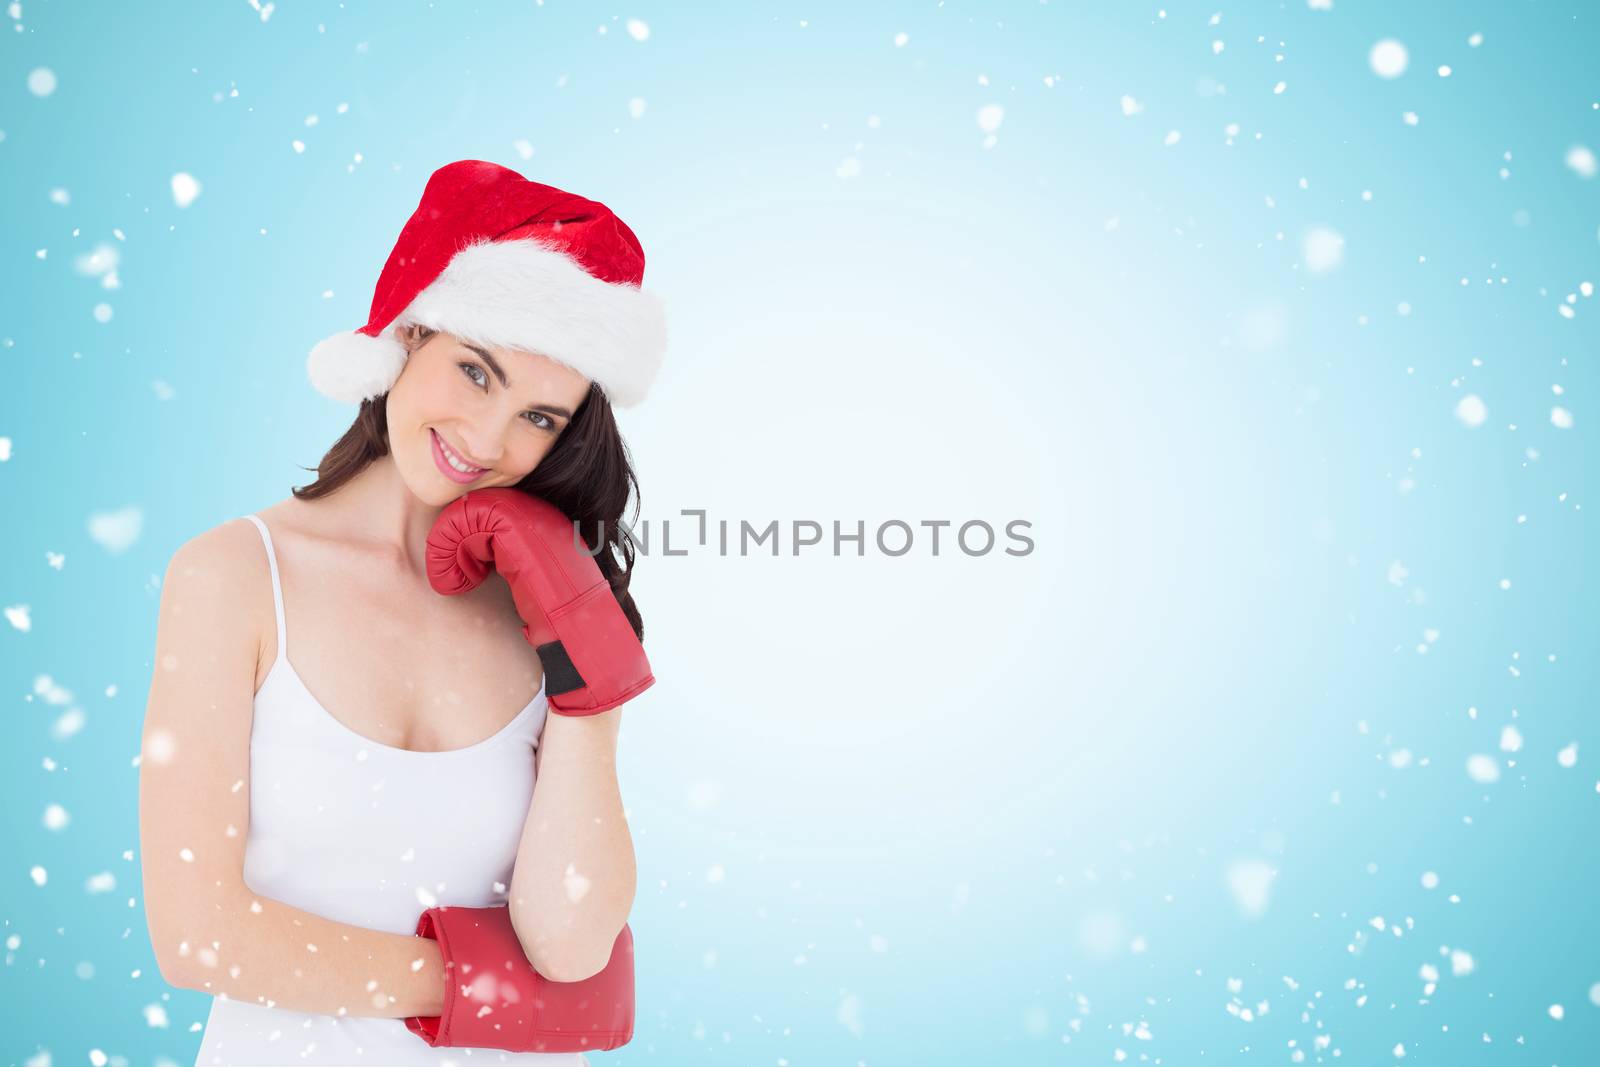 Beauty brown hair in boxing gloves against christmas snow falling